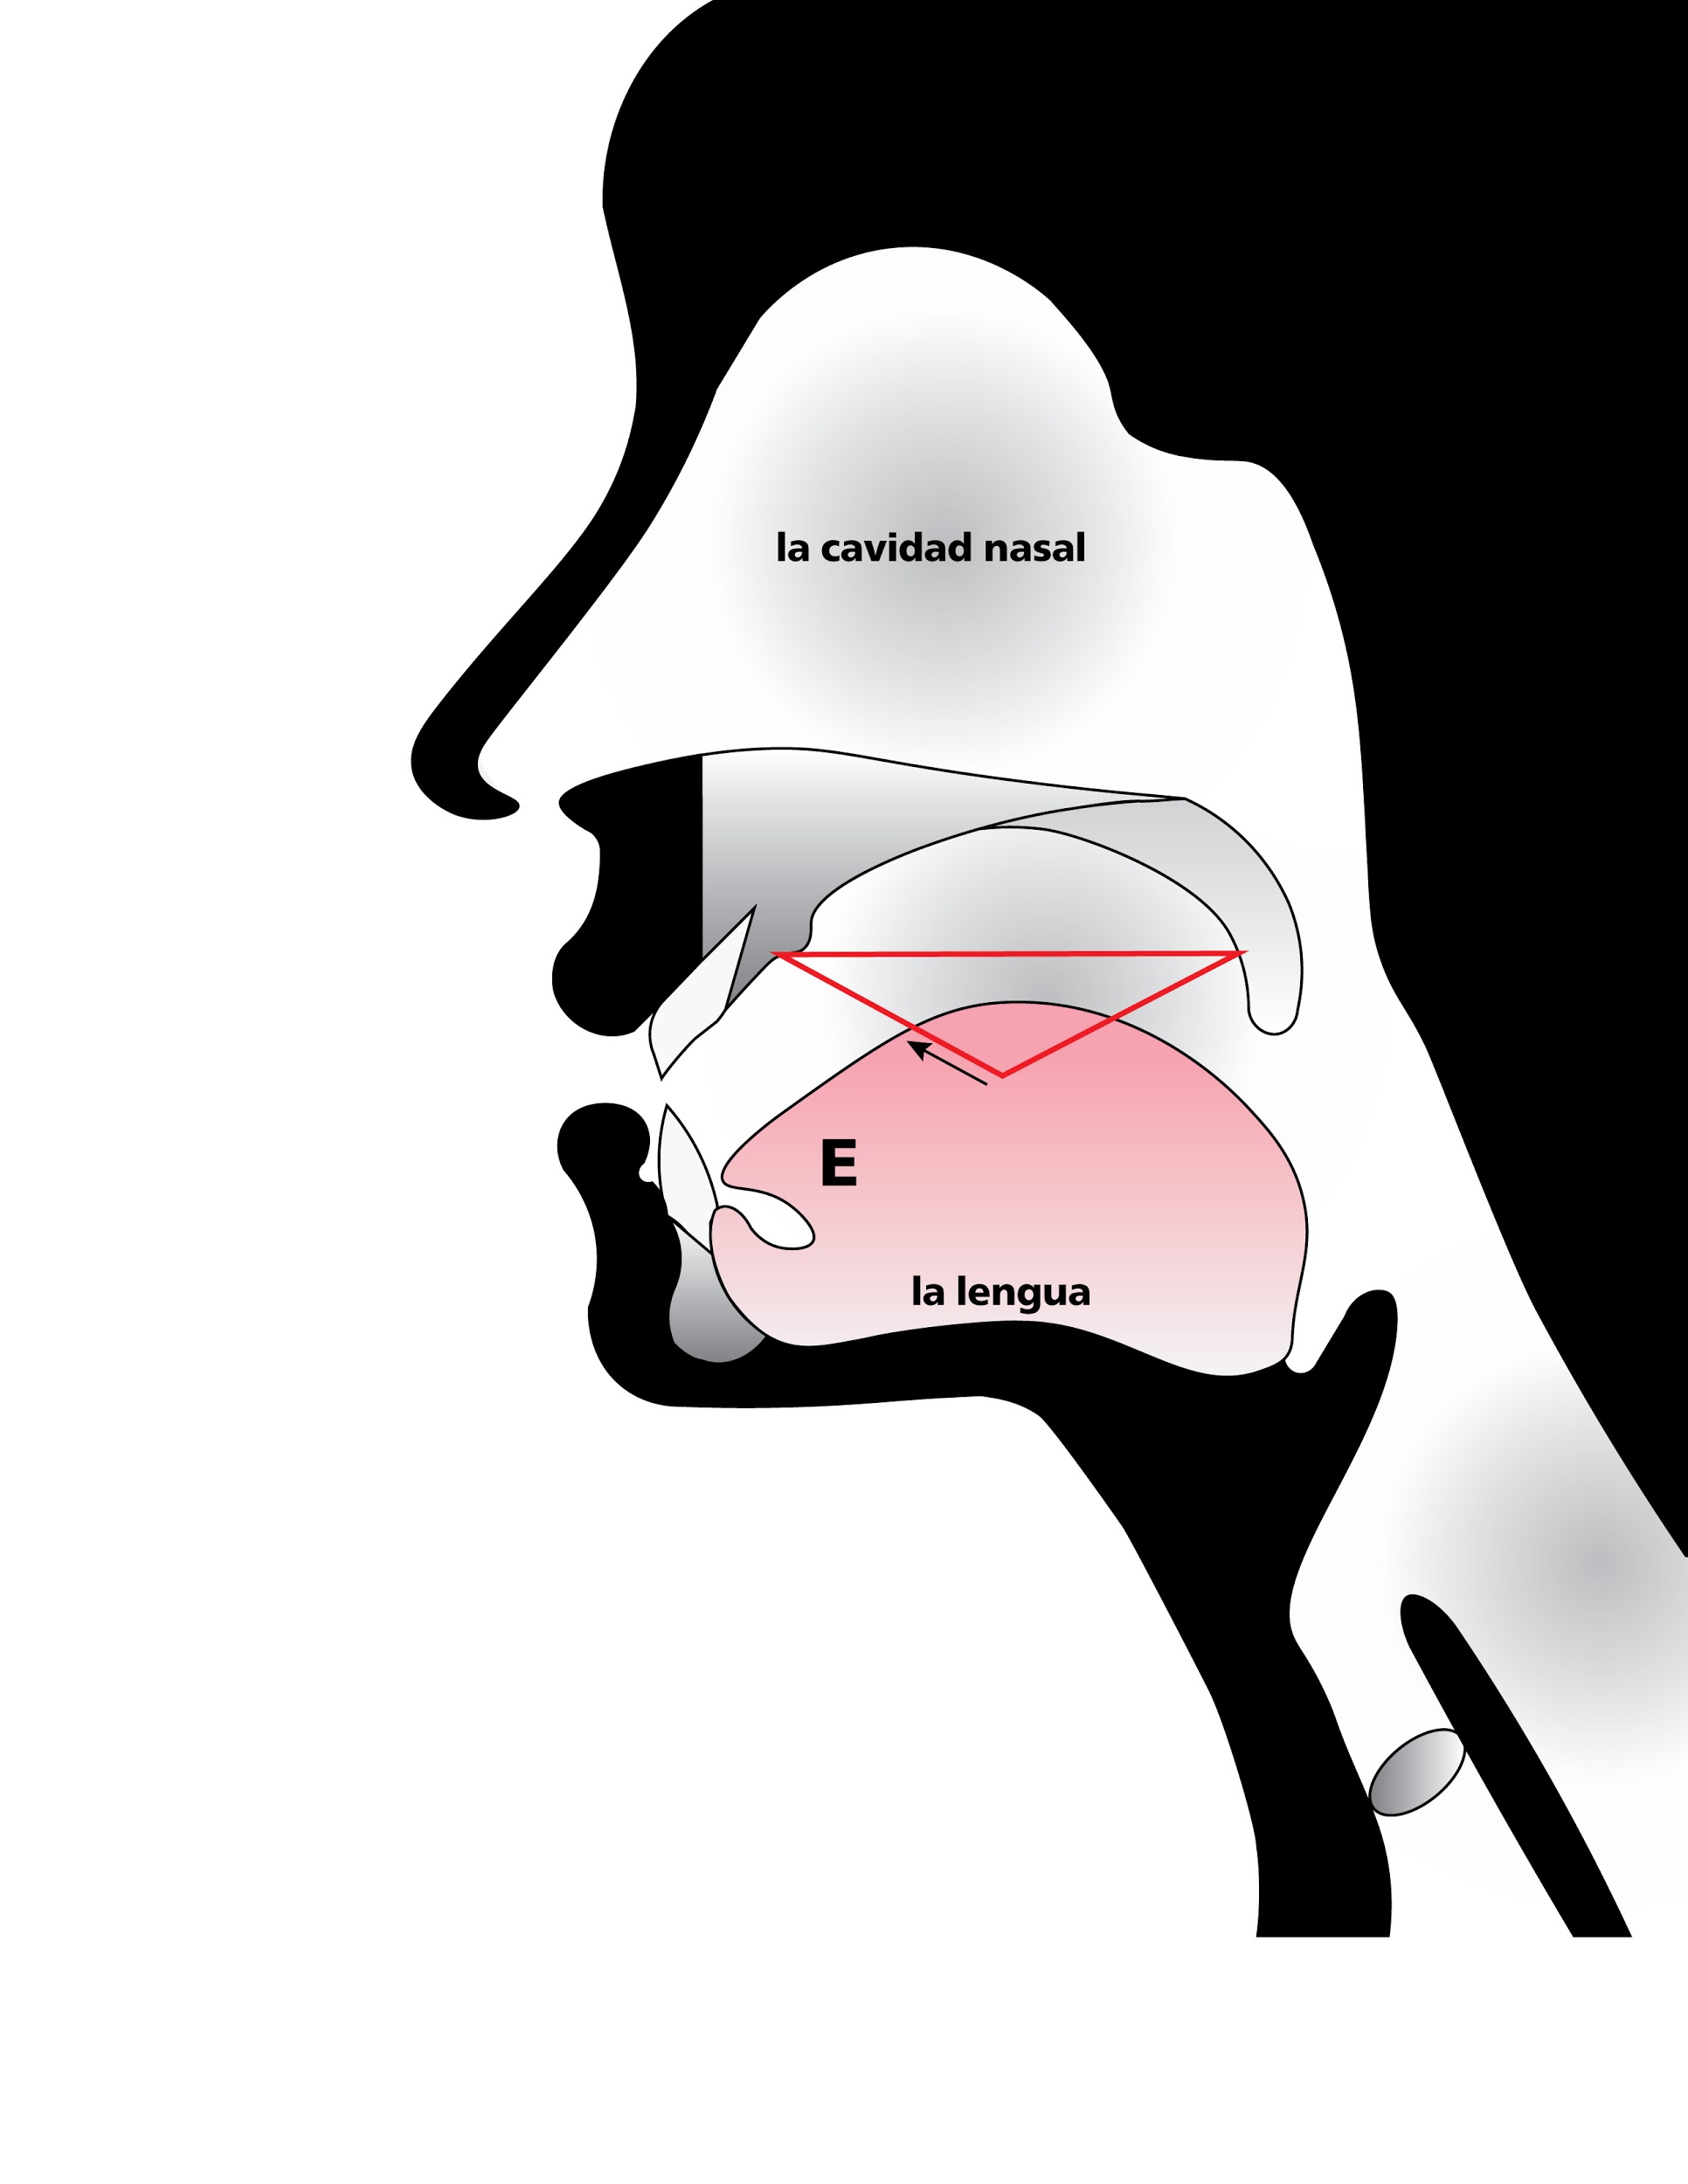 Anatomical sketch of head while speaking, emphasizing space of roof of mouth when tongue partly raised, in Spanish